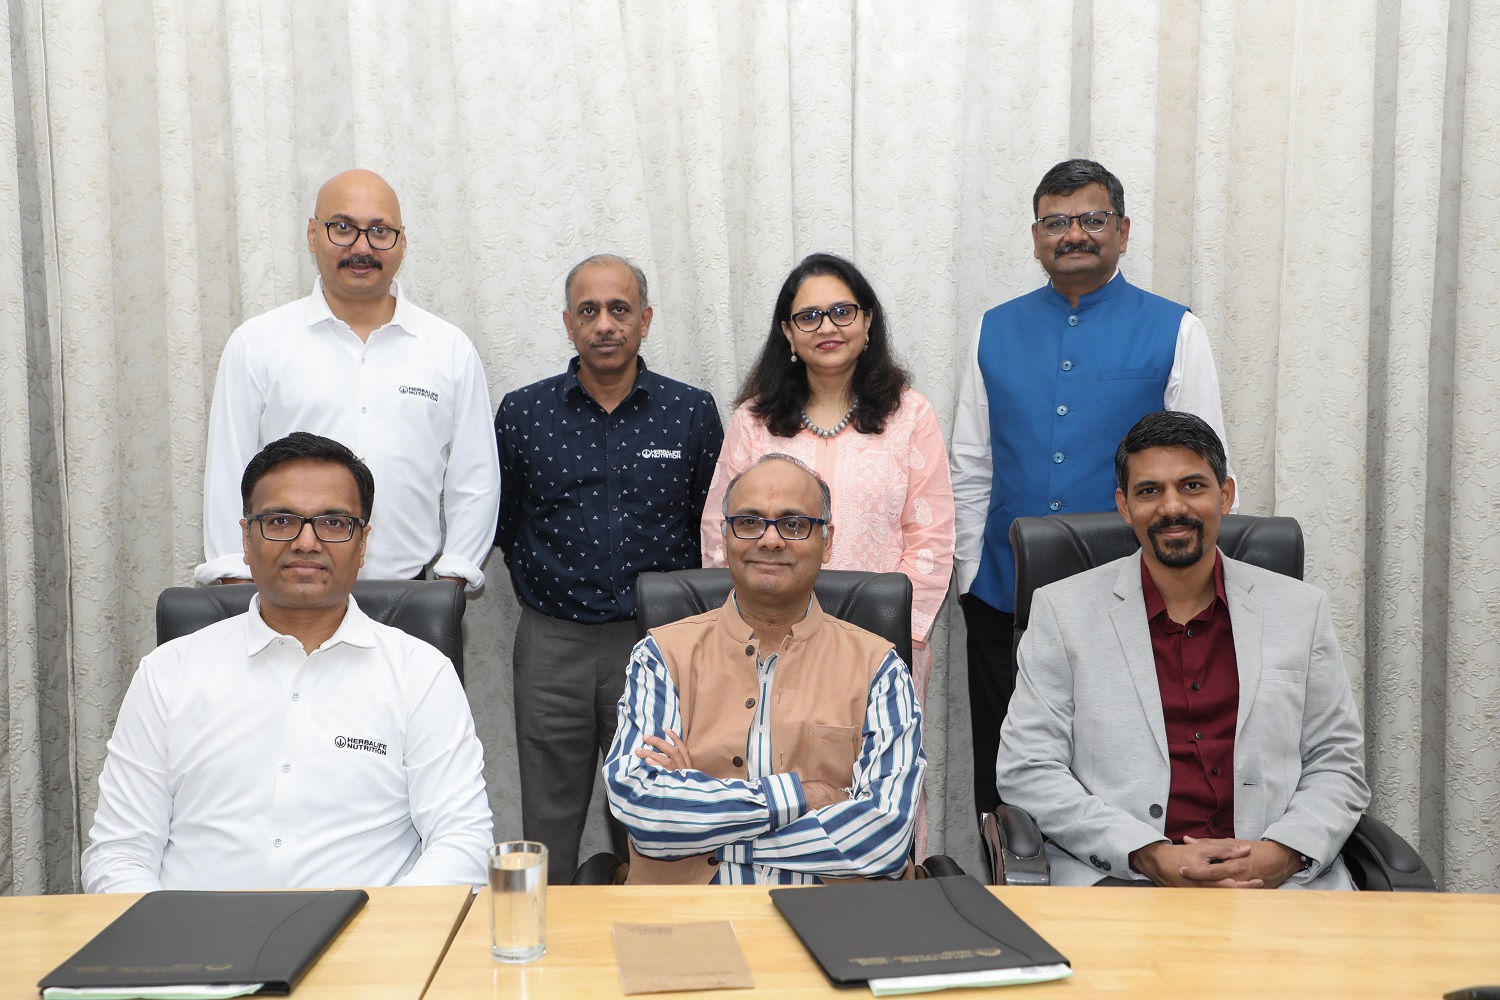 (Sitting L-R) Mr. Uday Prakash, VP, Finance & Operations, Herbalife India; Prof. Chetan Subramanian, Dean Faculty, IIMB, and Prof. Jitamitra Desai, Chairperson, Supply Chain Management Centre, IIMB. (Standing L-R) Mr. Indraneel Som, Senior Director, Human Resources, Herbalife Nutrition; Mr. Muralitharan K C V, Director, Market Compliance, CS & Infra Mgmt-India, Herbalife Nutrition; Ms Shwetha Jha, Corporate Communication & CSR, Herbalife Nutrition; and Dr. Aditya Gupta, Chief Operating Officer, Supply Chain Management Centre, IIMB.